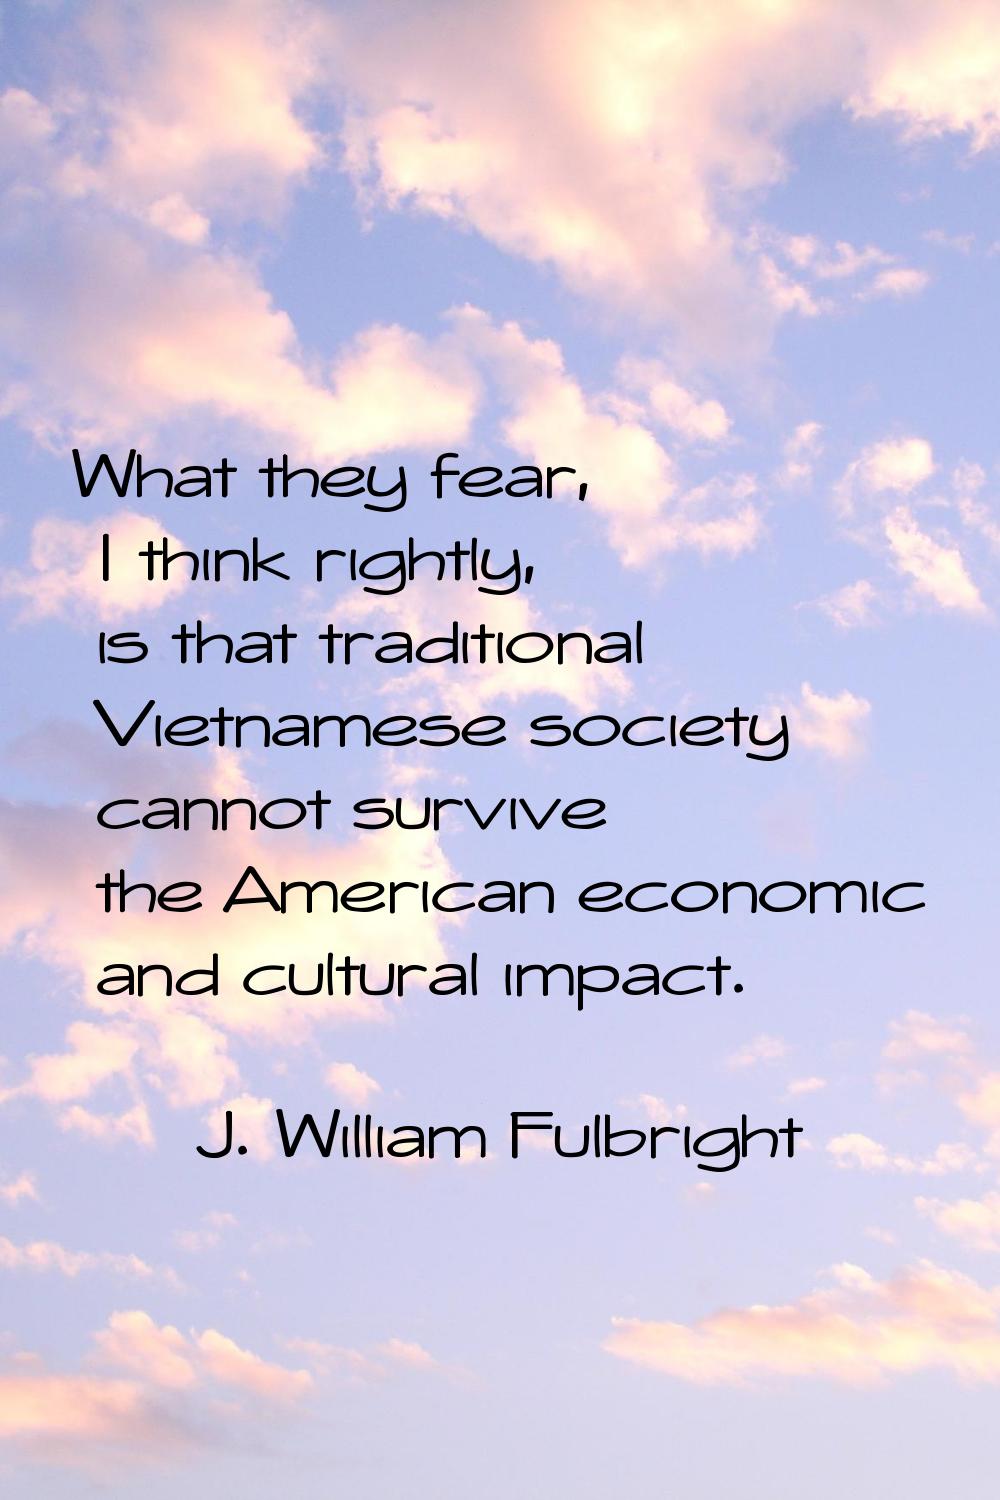 What they fear, I think rightly, is that traditional Vietnamese society cannot survive the American